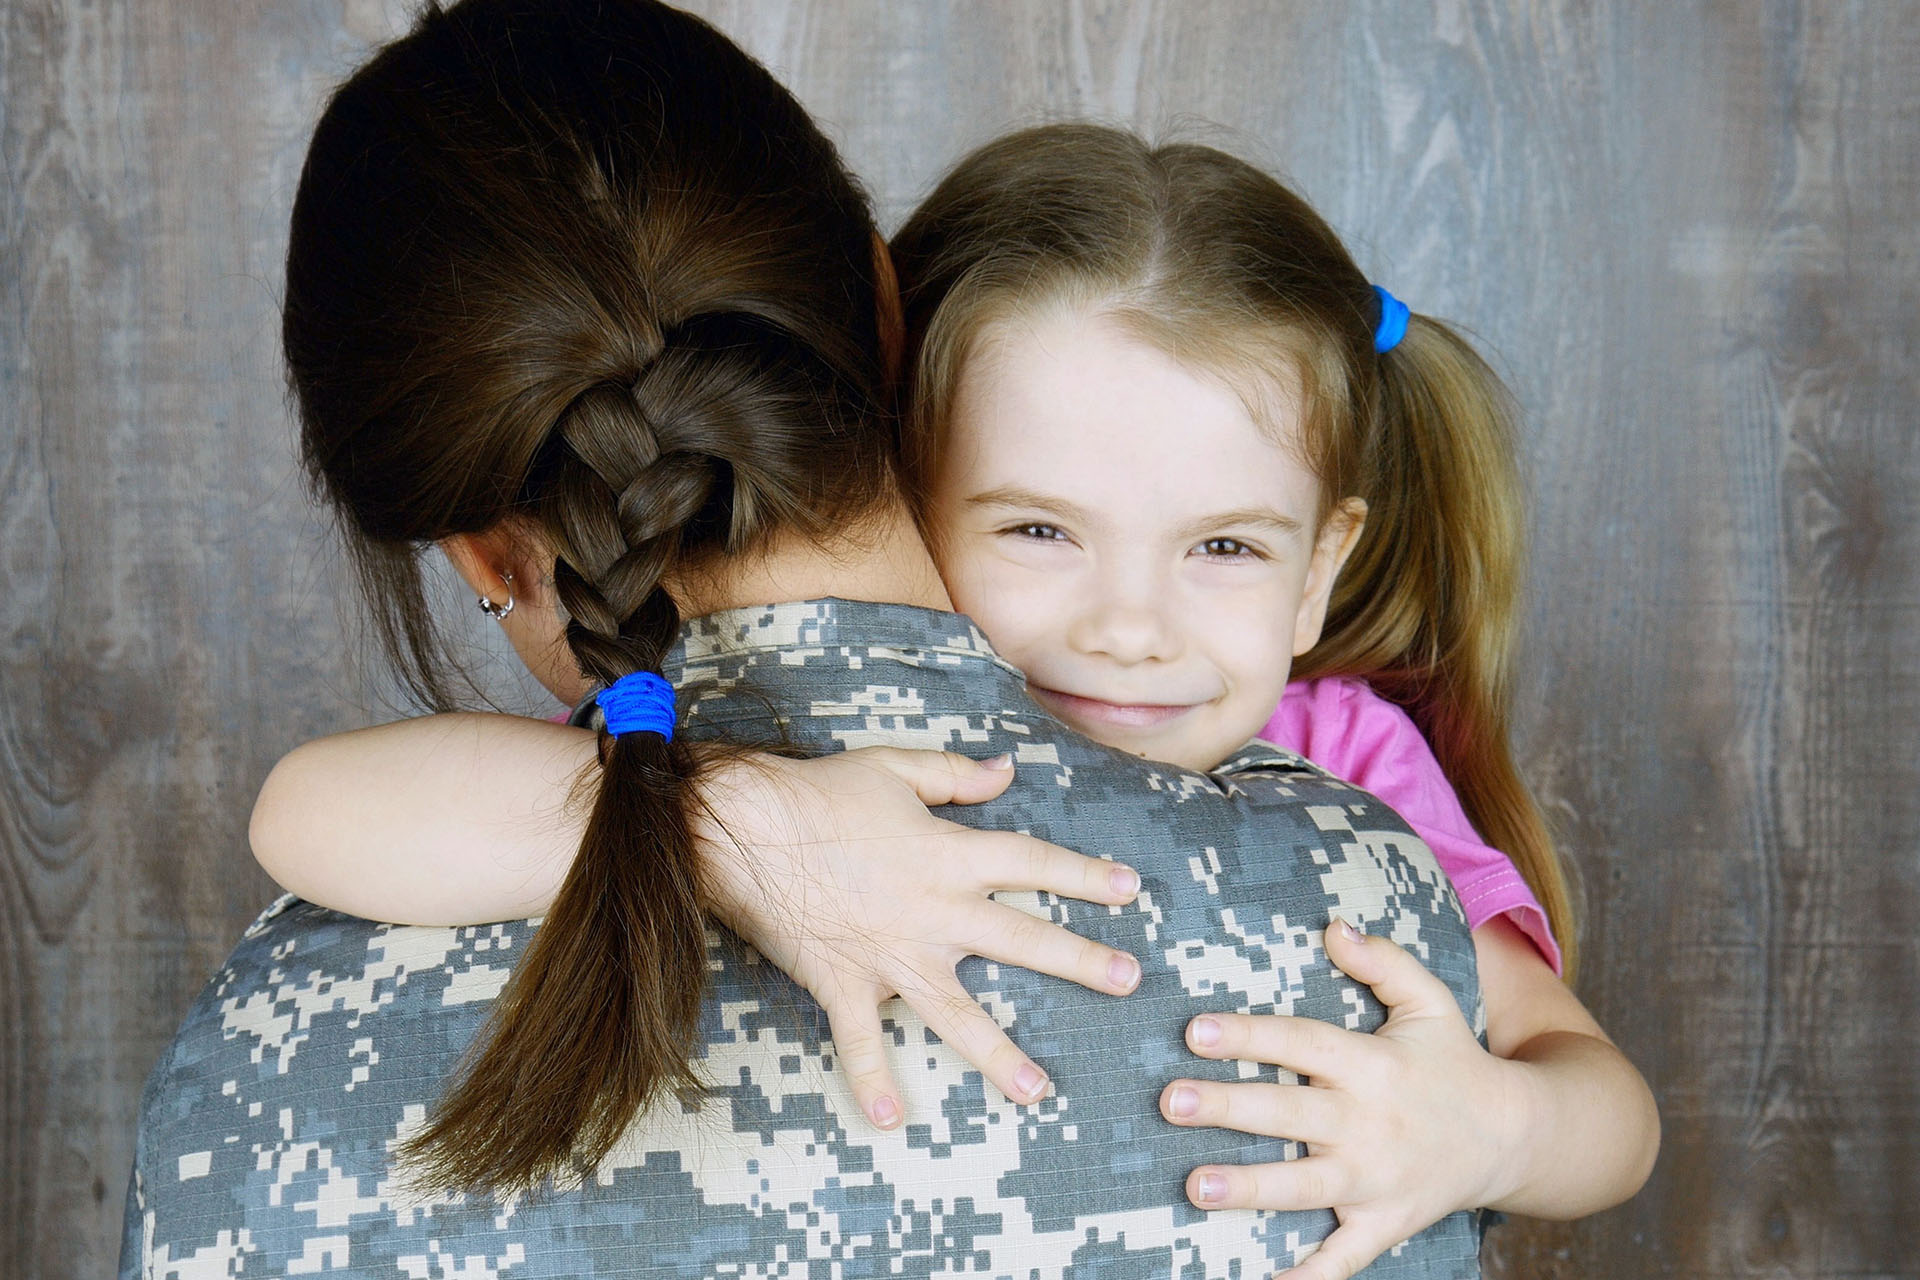 A smiling little girl hugging a female soldier